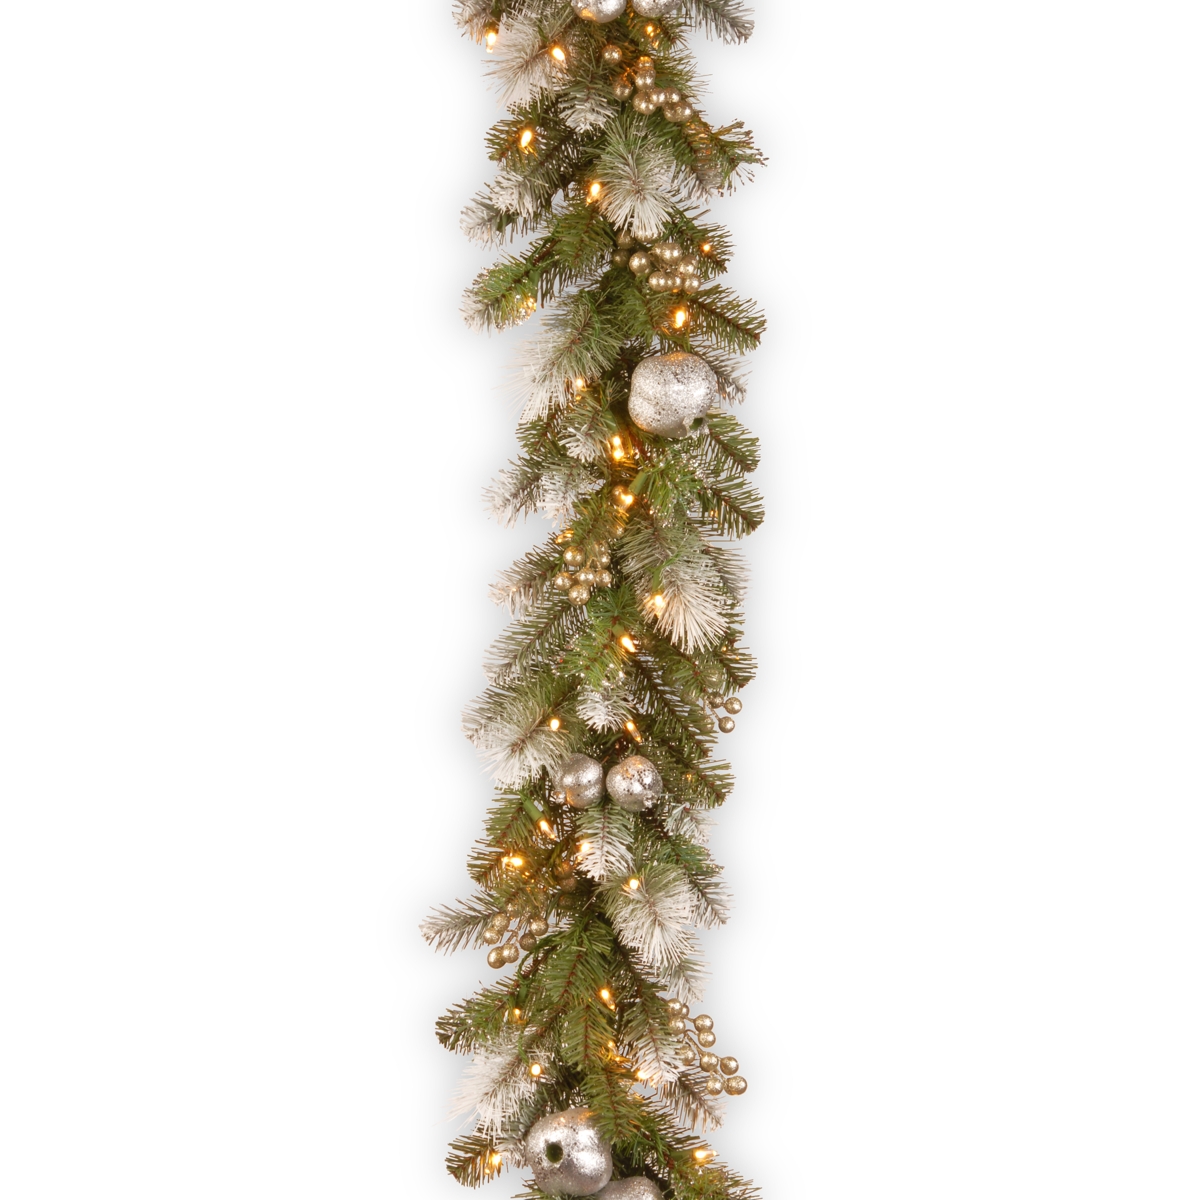 9' Glittery Pomegranate Pine Garland with Silver Pomegranates,Champagne Berries Frosted Tips and 100 Clear Lights - Green